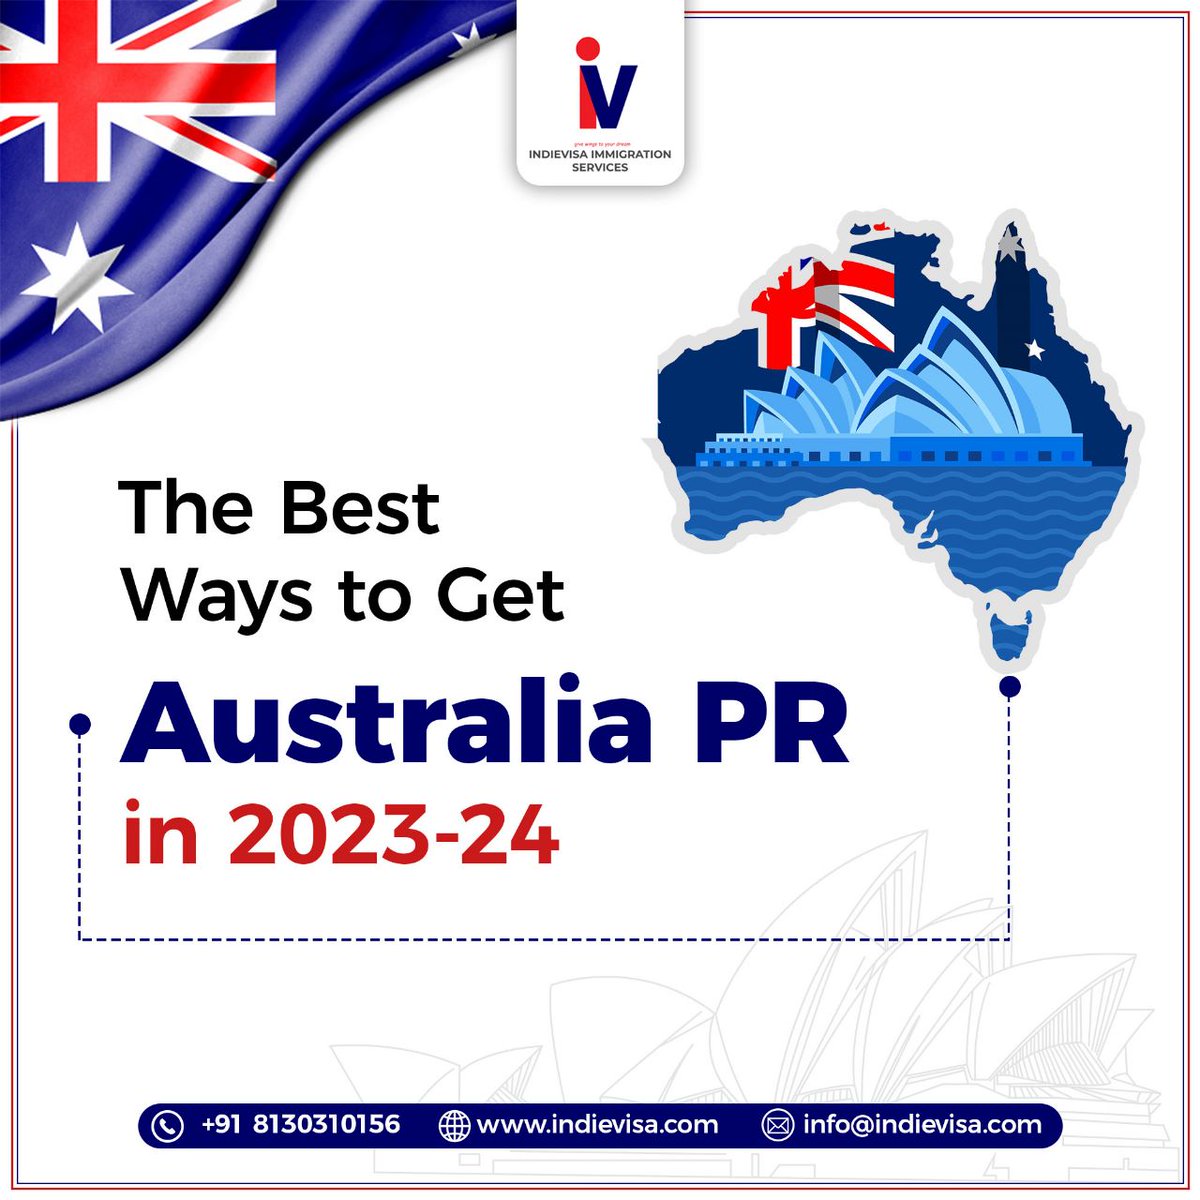 Two of the best and most efficient ways to get an Australia PR Visa are through skilled migration and employer sponsorship. To consult with us about them, dial +91 8130310156 today. 
#Immigration #AustraliaVisa #AustraliaPR #ImmigrationConsultants #indievisa